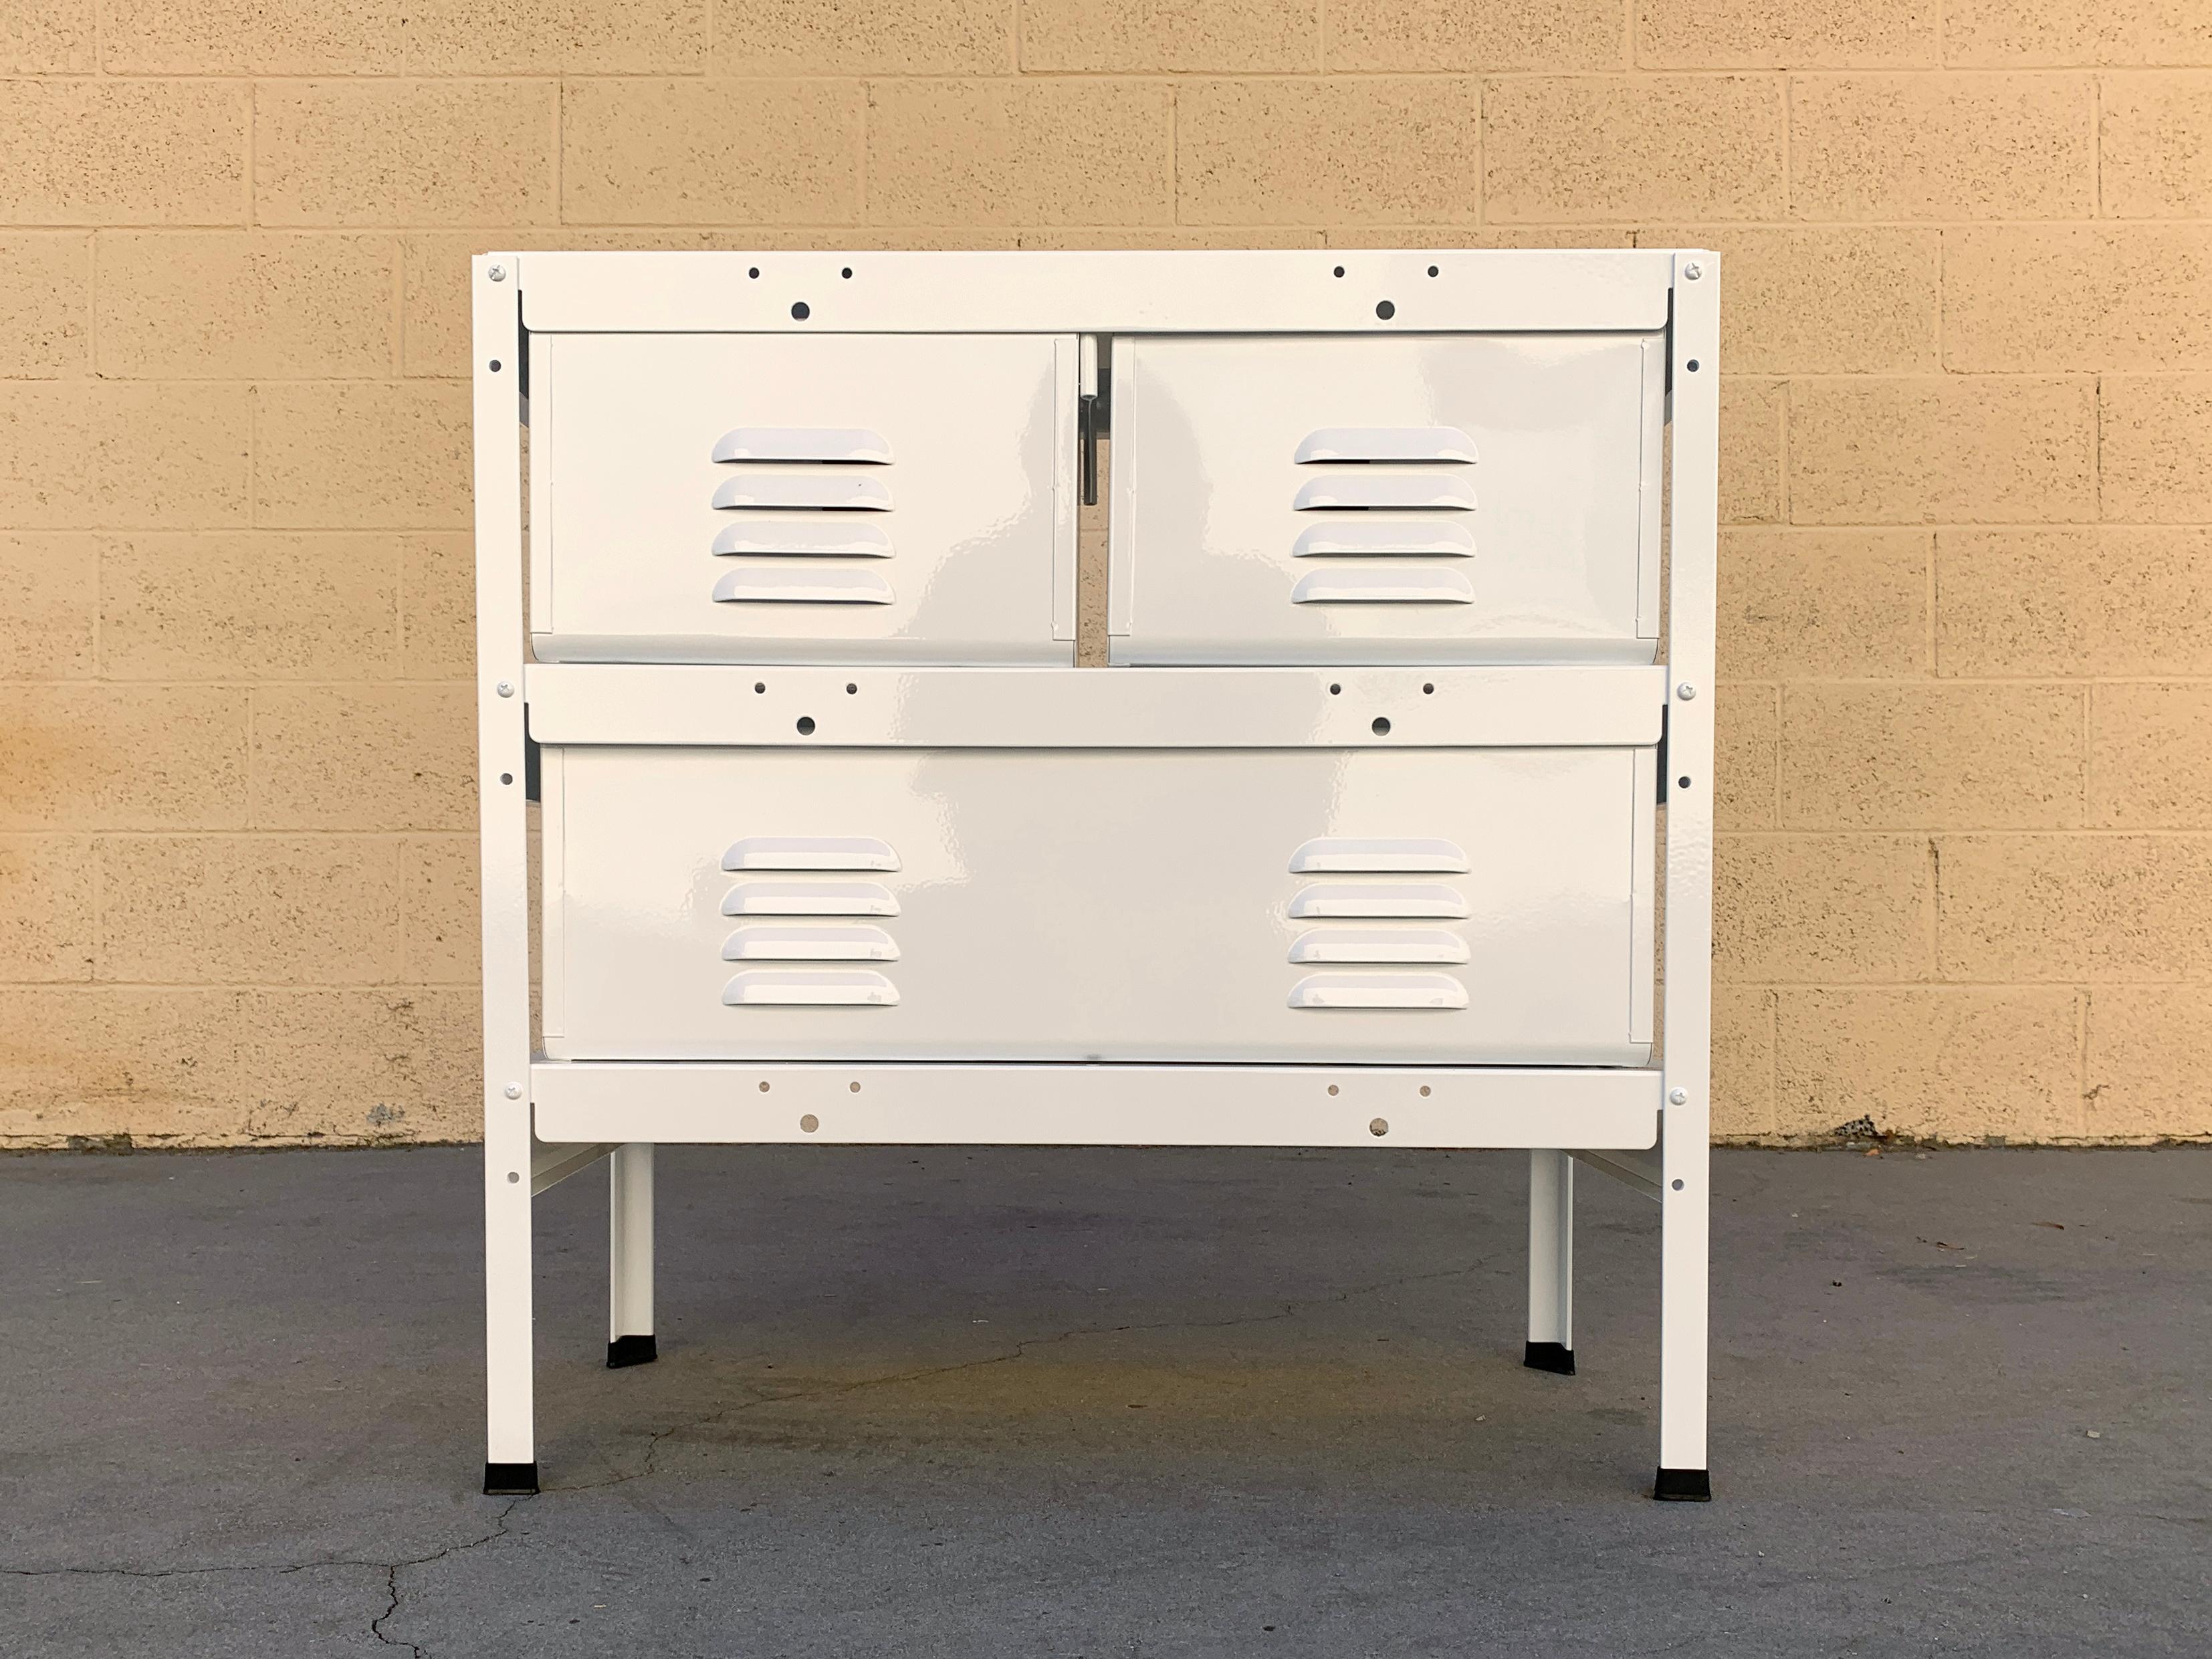 Our newly fabricated locker basket units are inspired by the midcentury classics we've been refinishing for years. Featured here is a 2 x 2 unit in monochrome gloss white baskets in a gloss white frame. This unit includes two single-size basket and